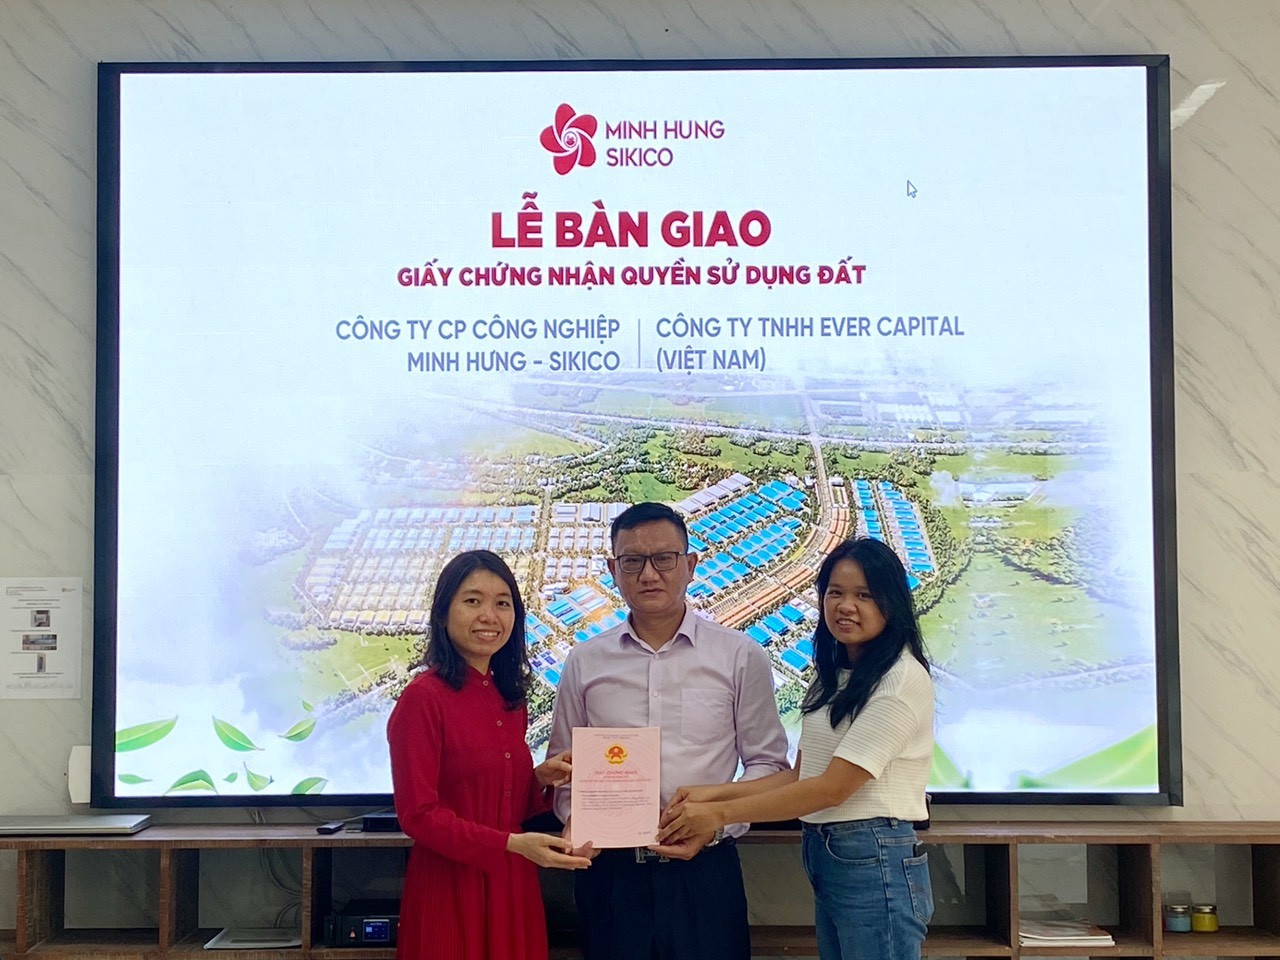 CONGRATULATIONS EVER CAPITAL CO., LTD SUCCESSFULLY RECEIVED ITS LAND USE RIGHT CERTIFICATE IN MINH HUNG SIKICO INDUSTRIAL PARK